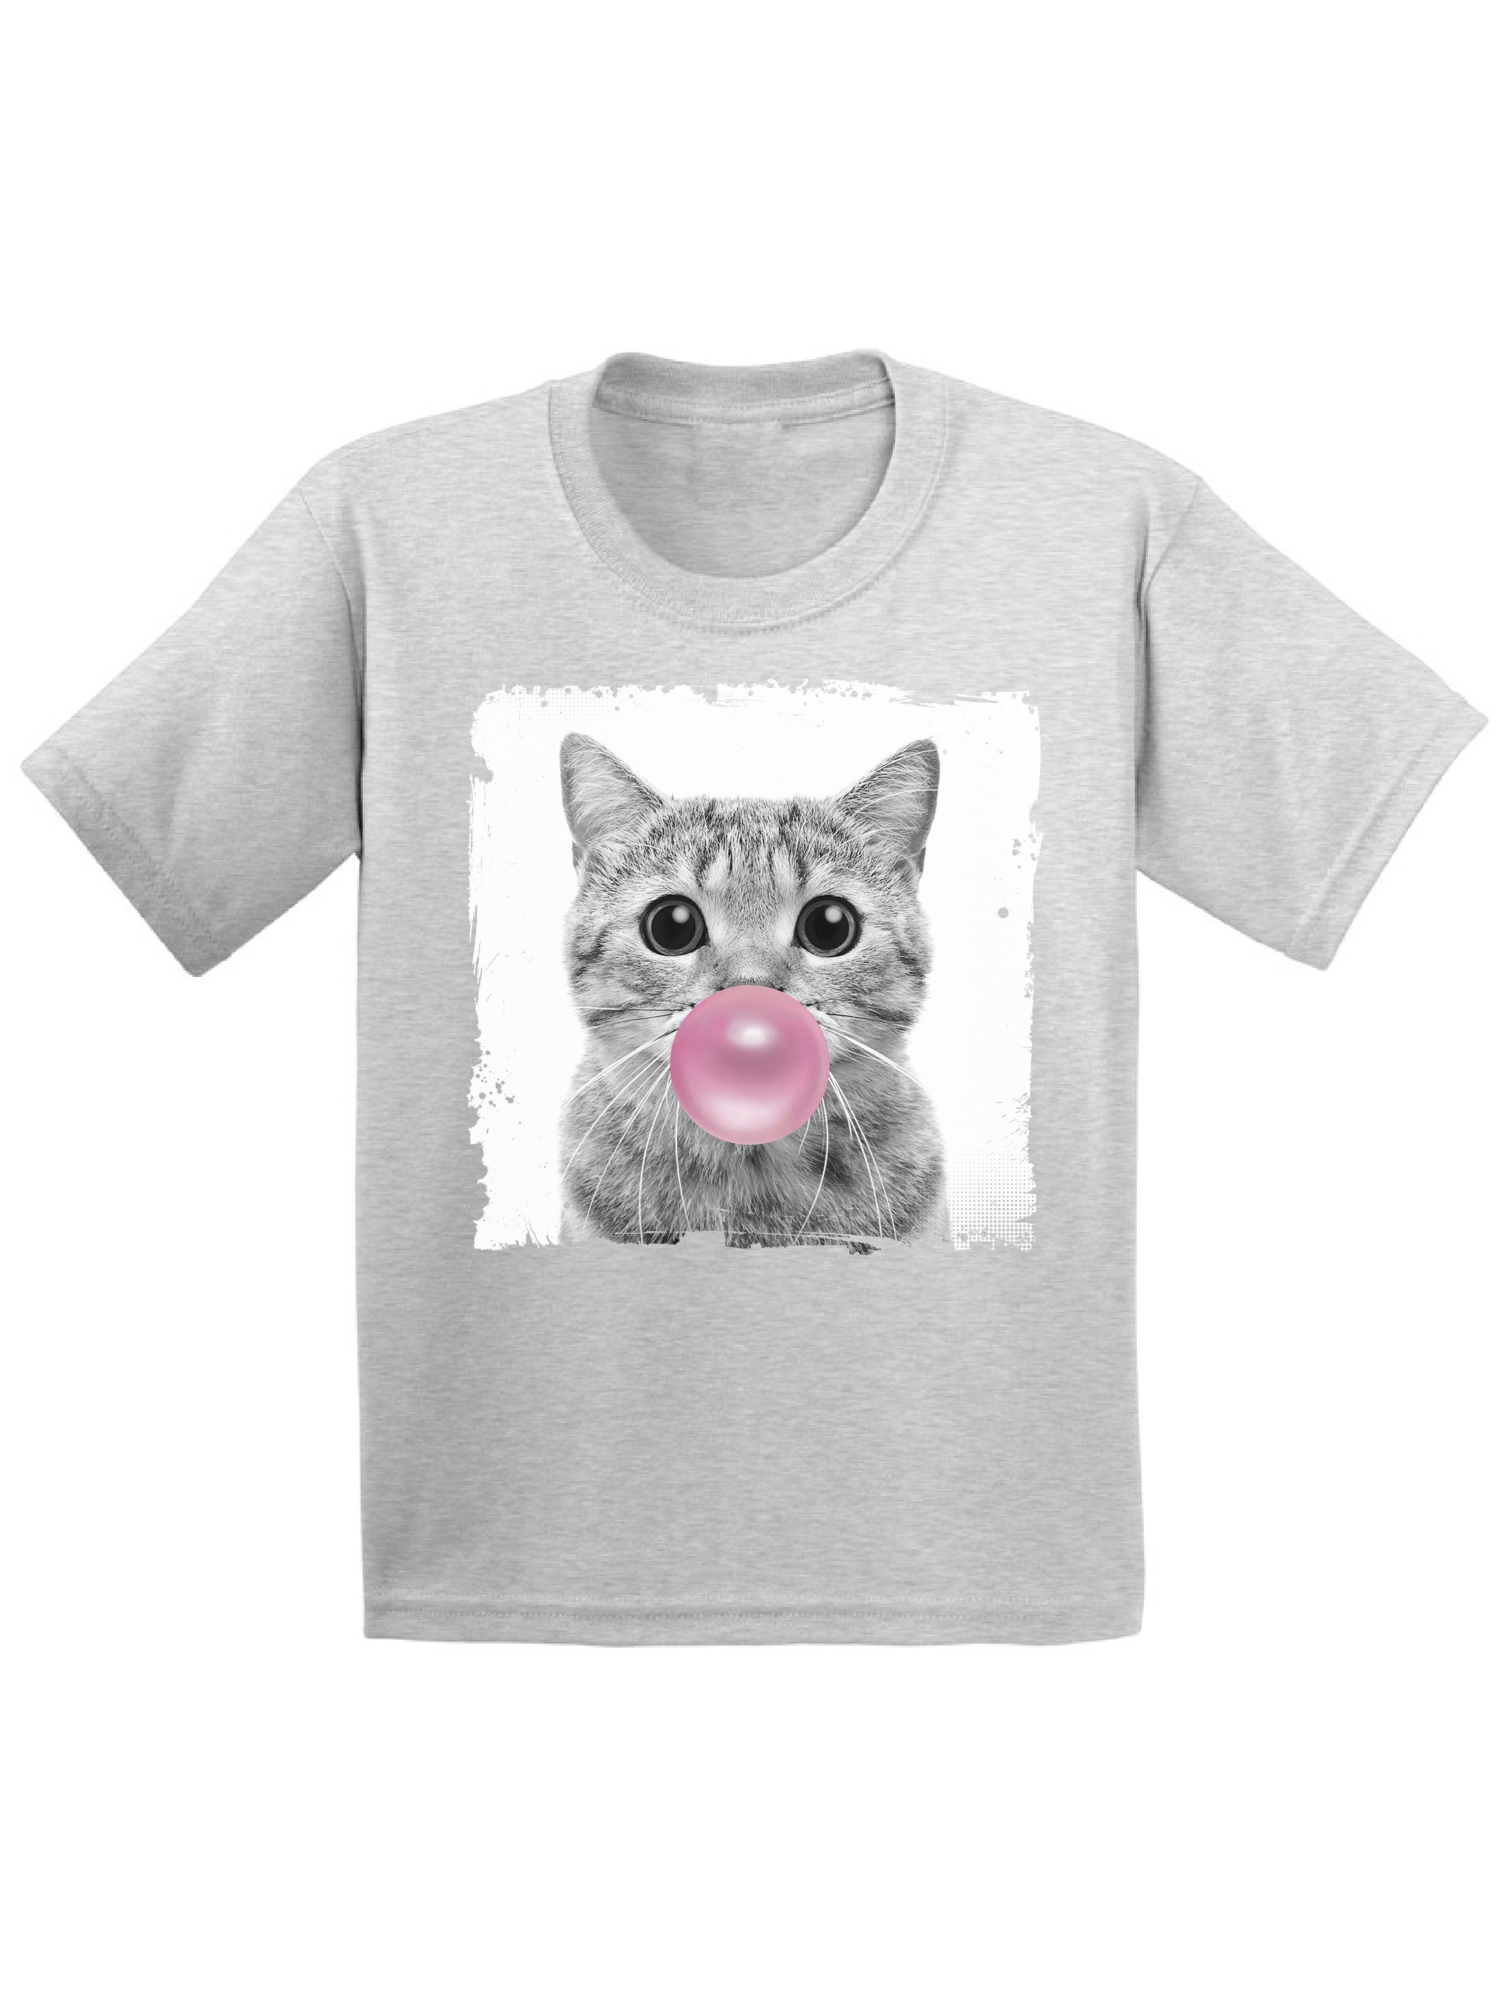 Awkward Styles Funny Cat Blowing Gum Shirt Cat Lovers Lovely Gifts for Kids Funny Animal Youth Shirt Cute Animal Lovers Clothes New Kids T Shirt Gifts for Kids Little Cat Clothing Childrens Outfit - image 1 of 4